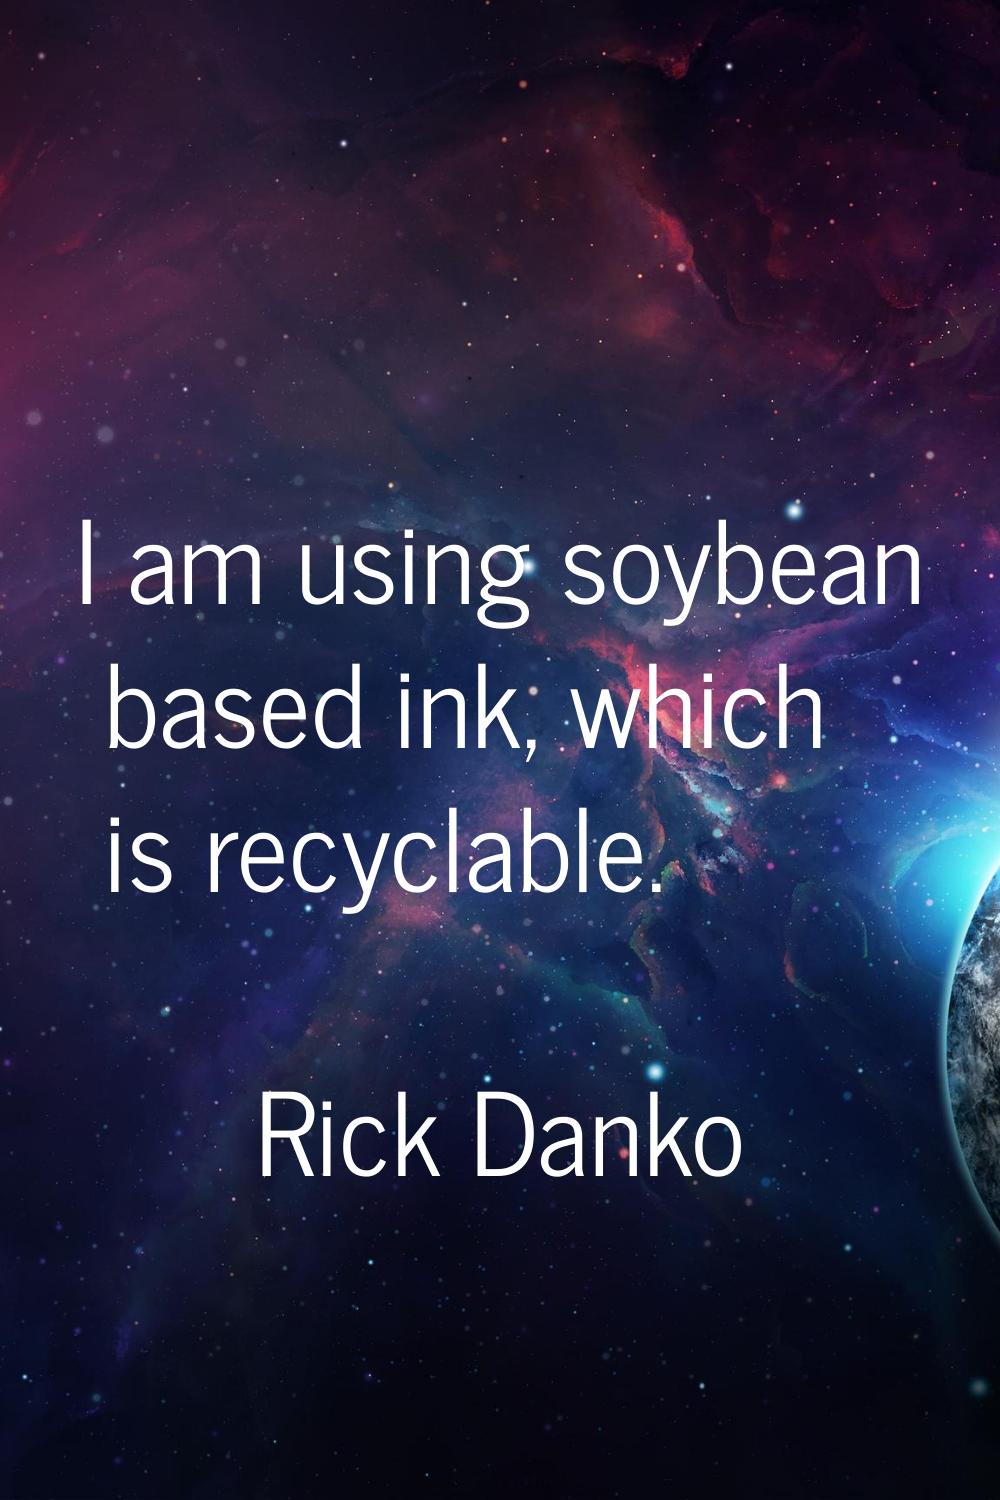 I am using soybean based ink, which is recyclable.